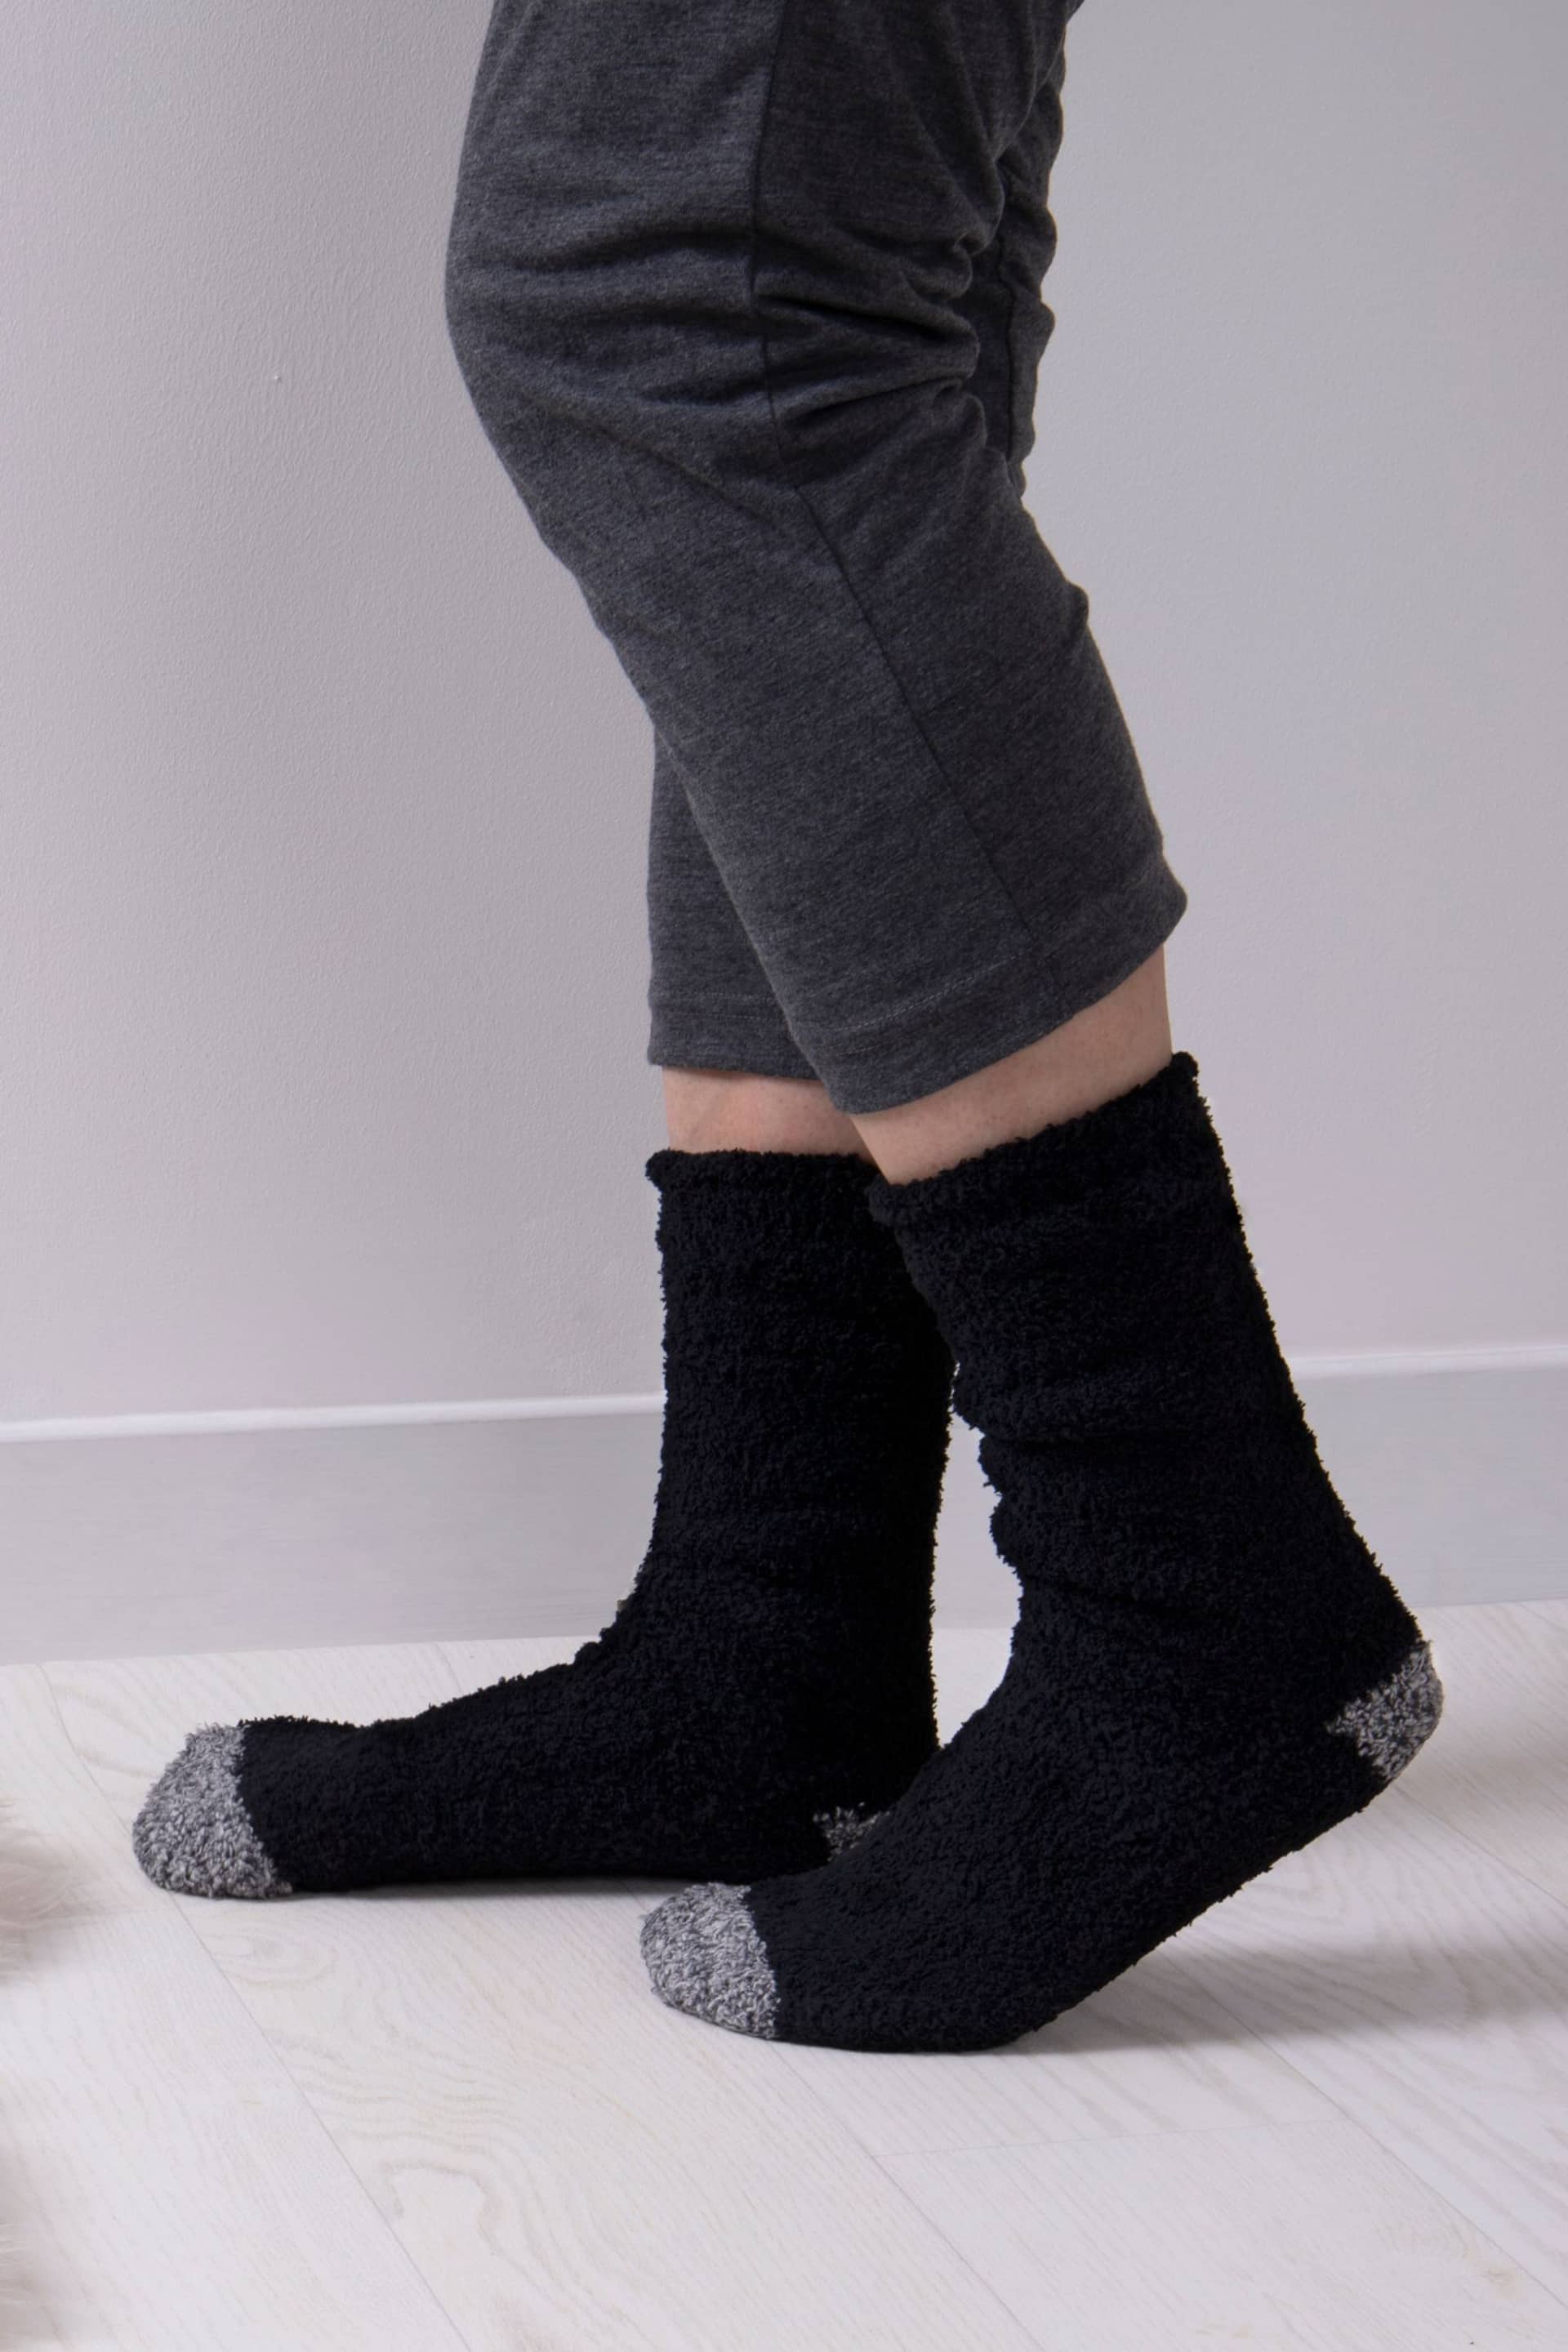 Totes Black Mens Supersoft Twin Pack Socks - Image 4 of 4